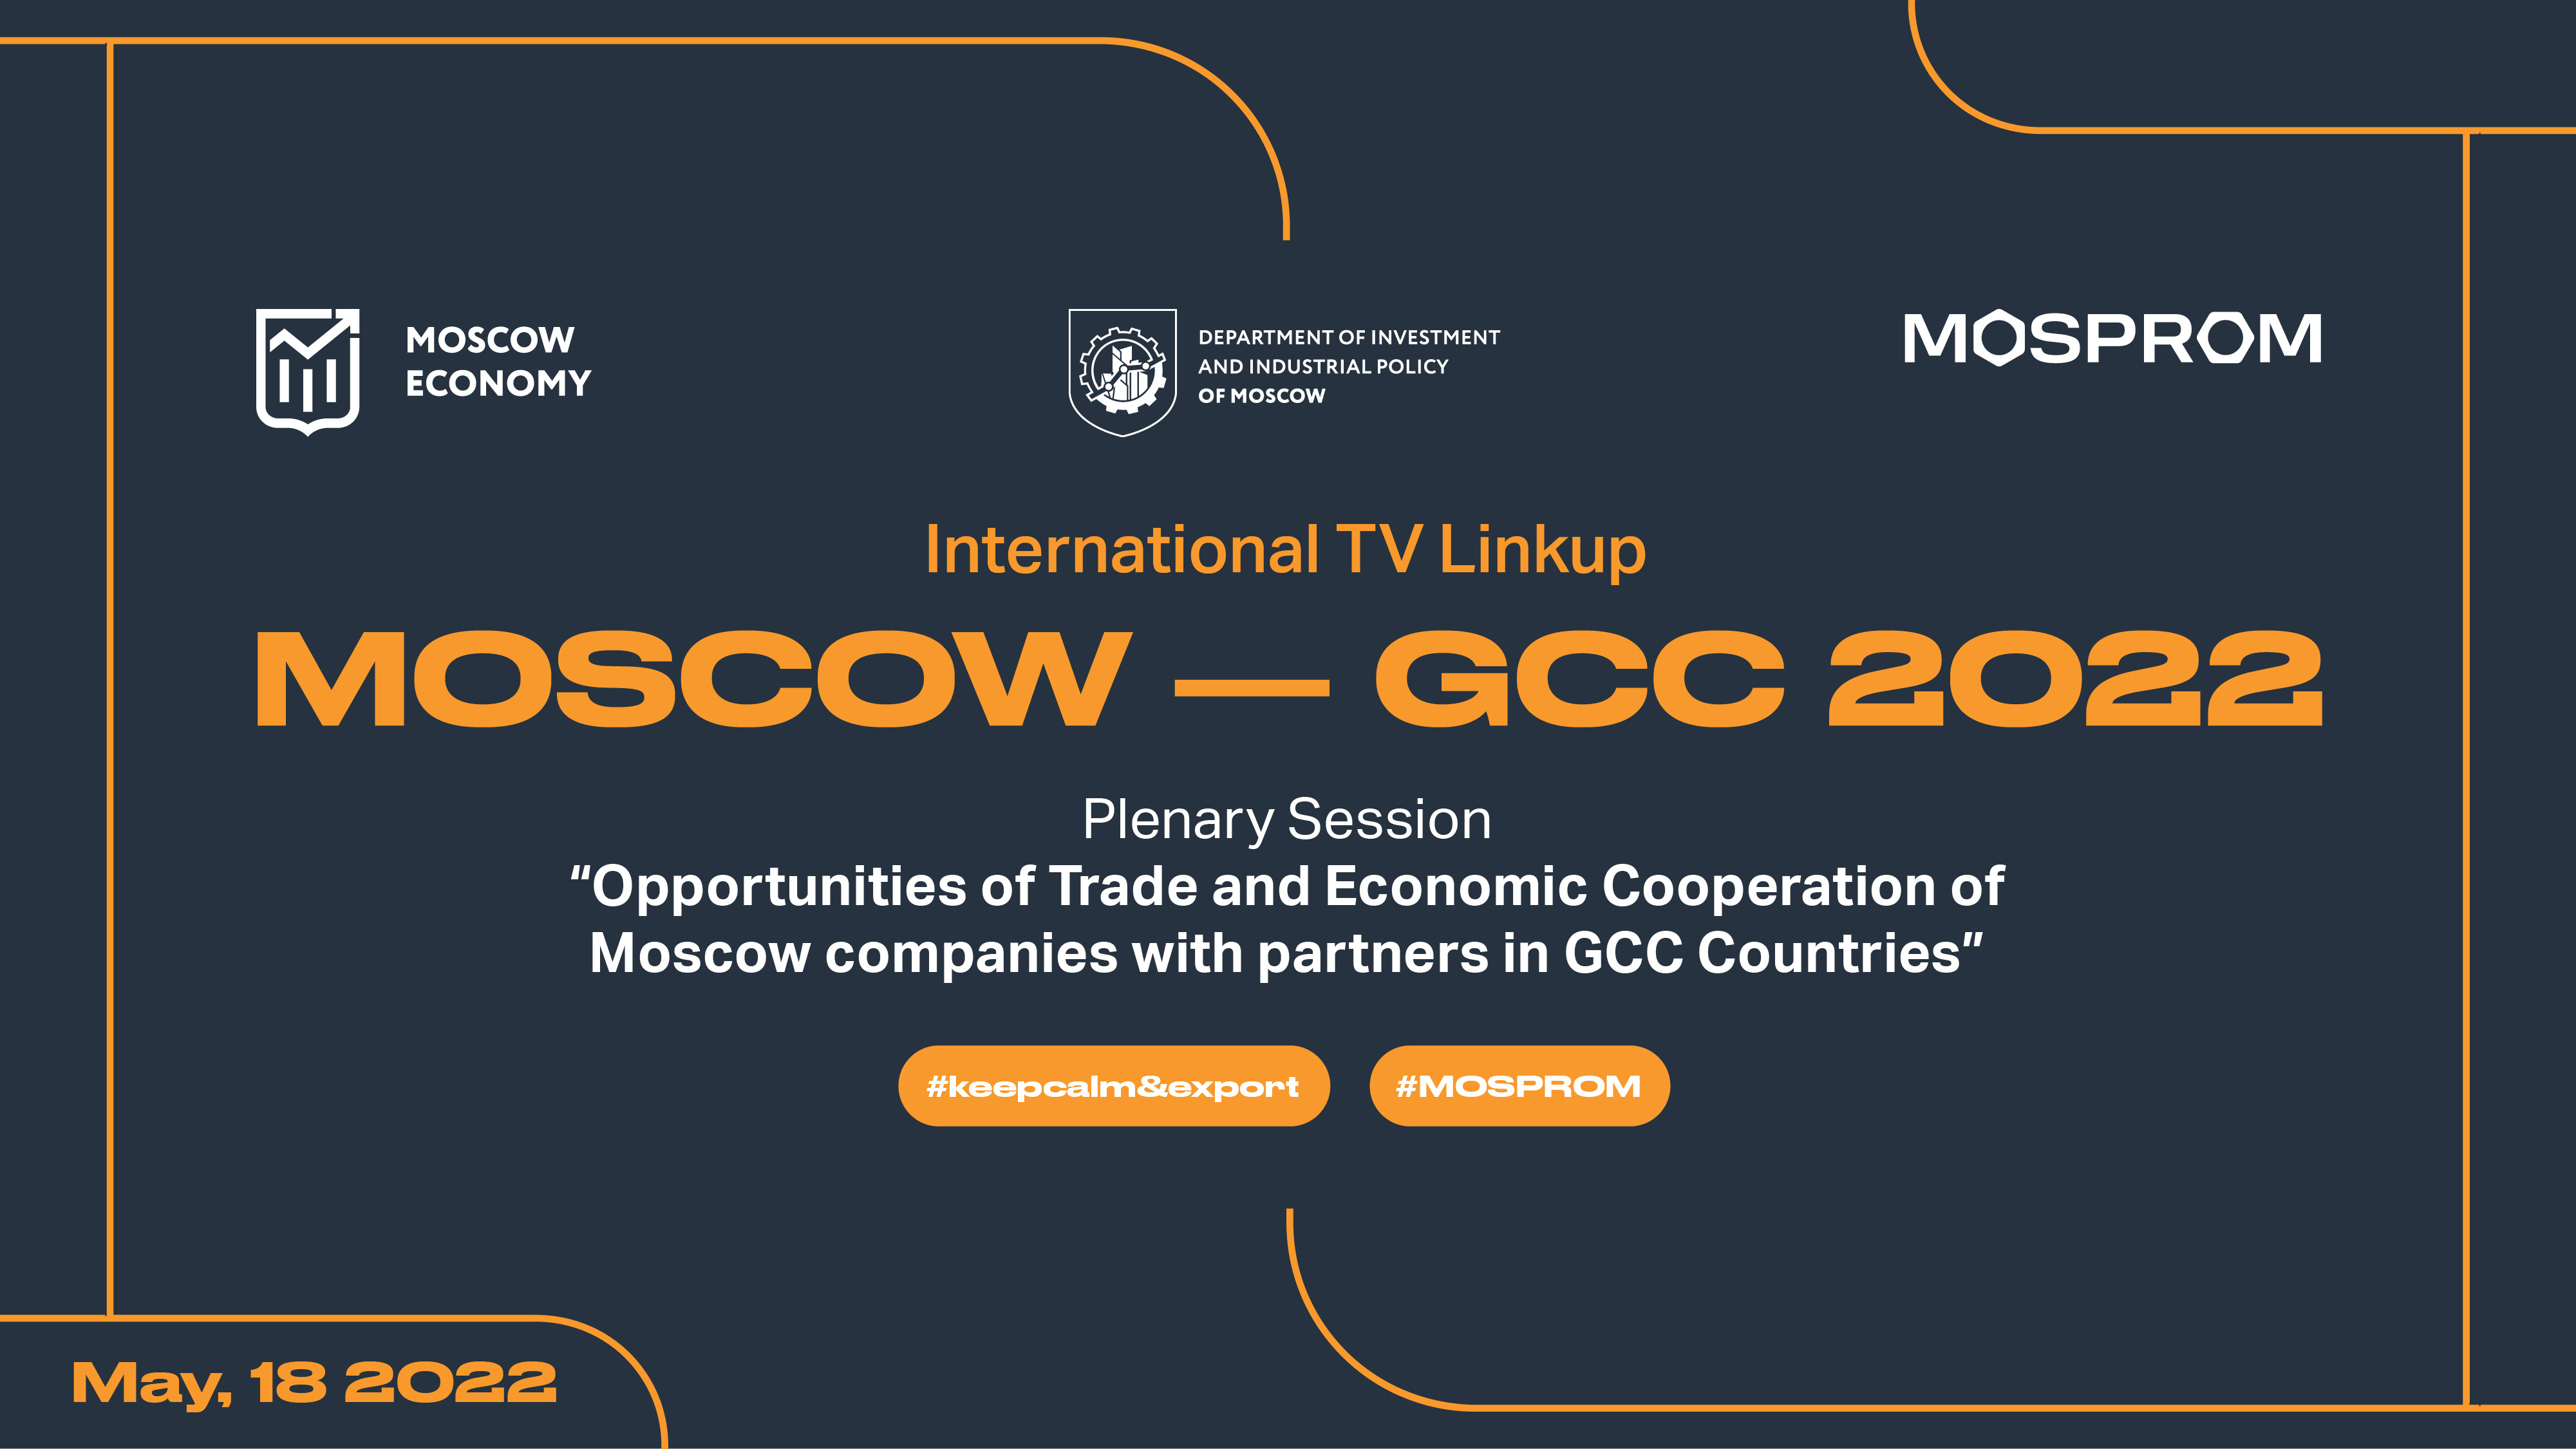 MGCC 2022. Opportunities of Trade and Economic Cooperation of Moscow companies with partners in GCC